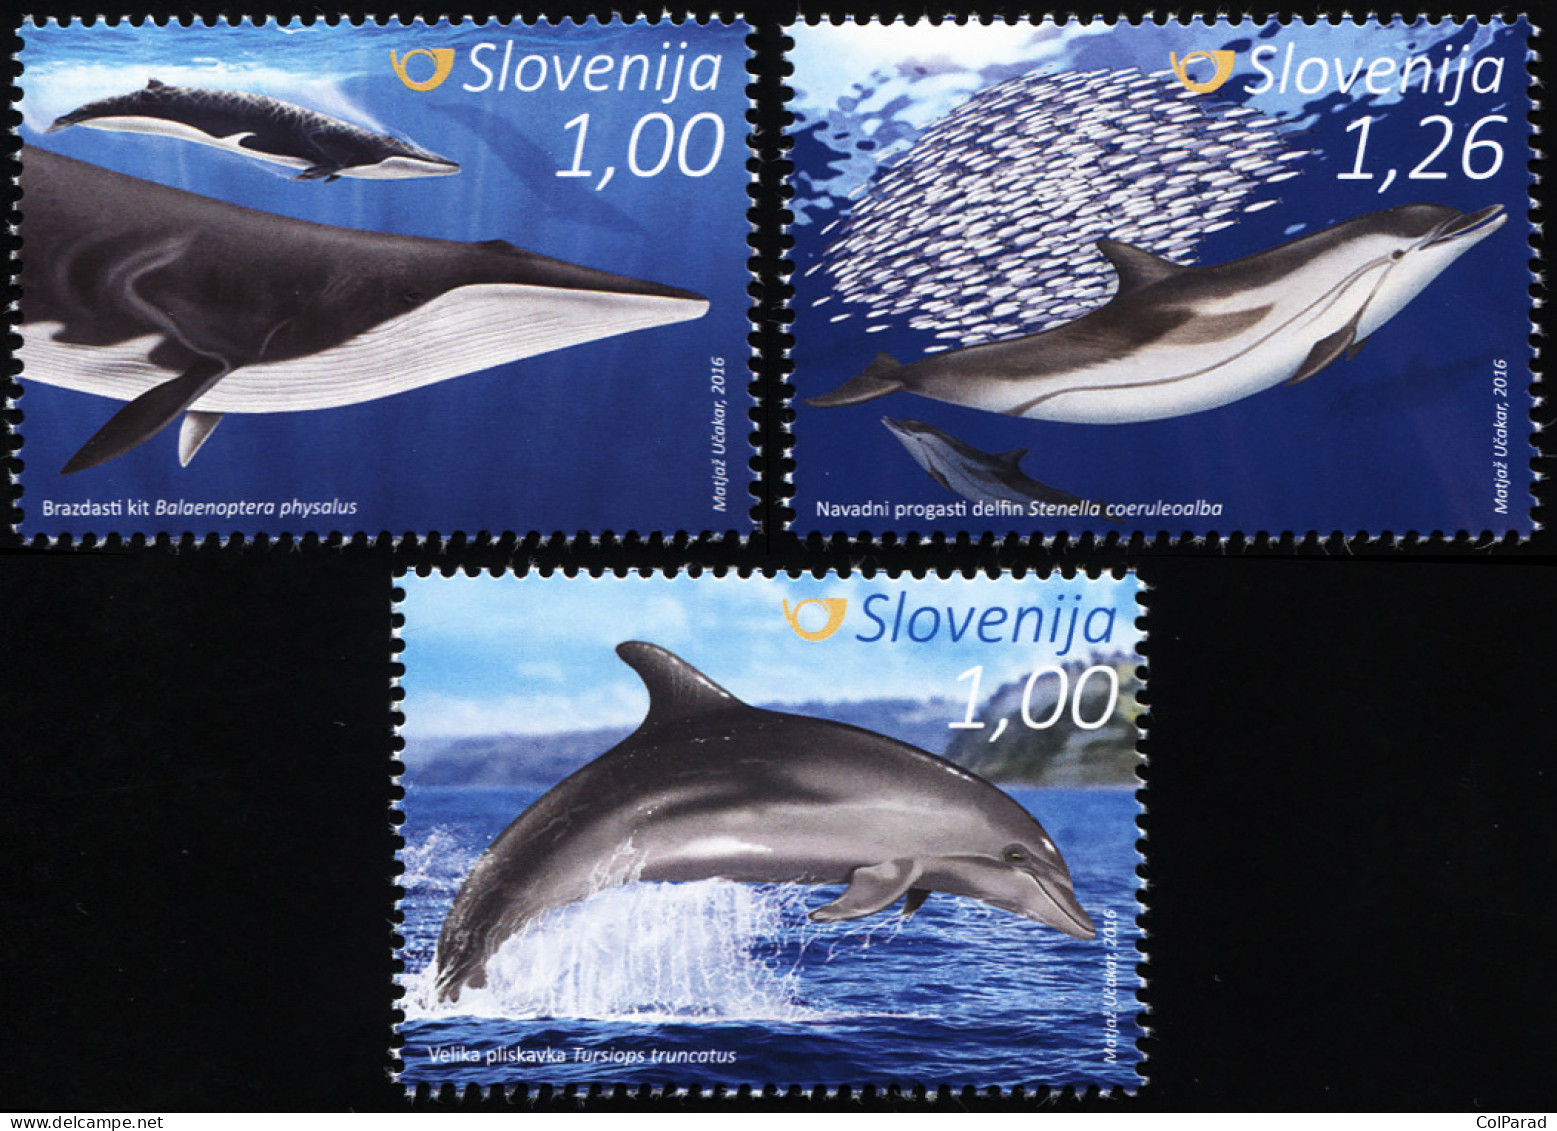 SLOVENIA - 2016 - SET OF 3 STAMPS MNH ** - Dolphins And Whales - Slovenia